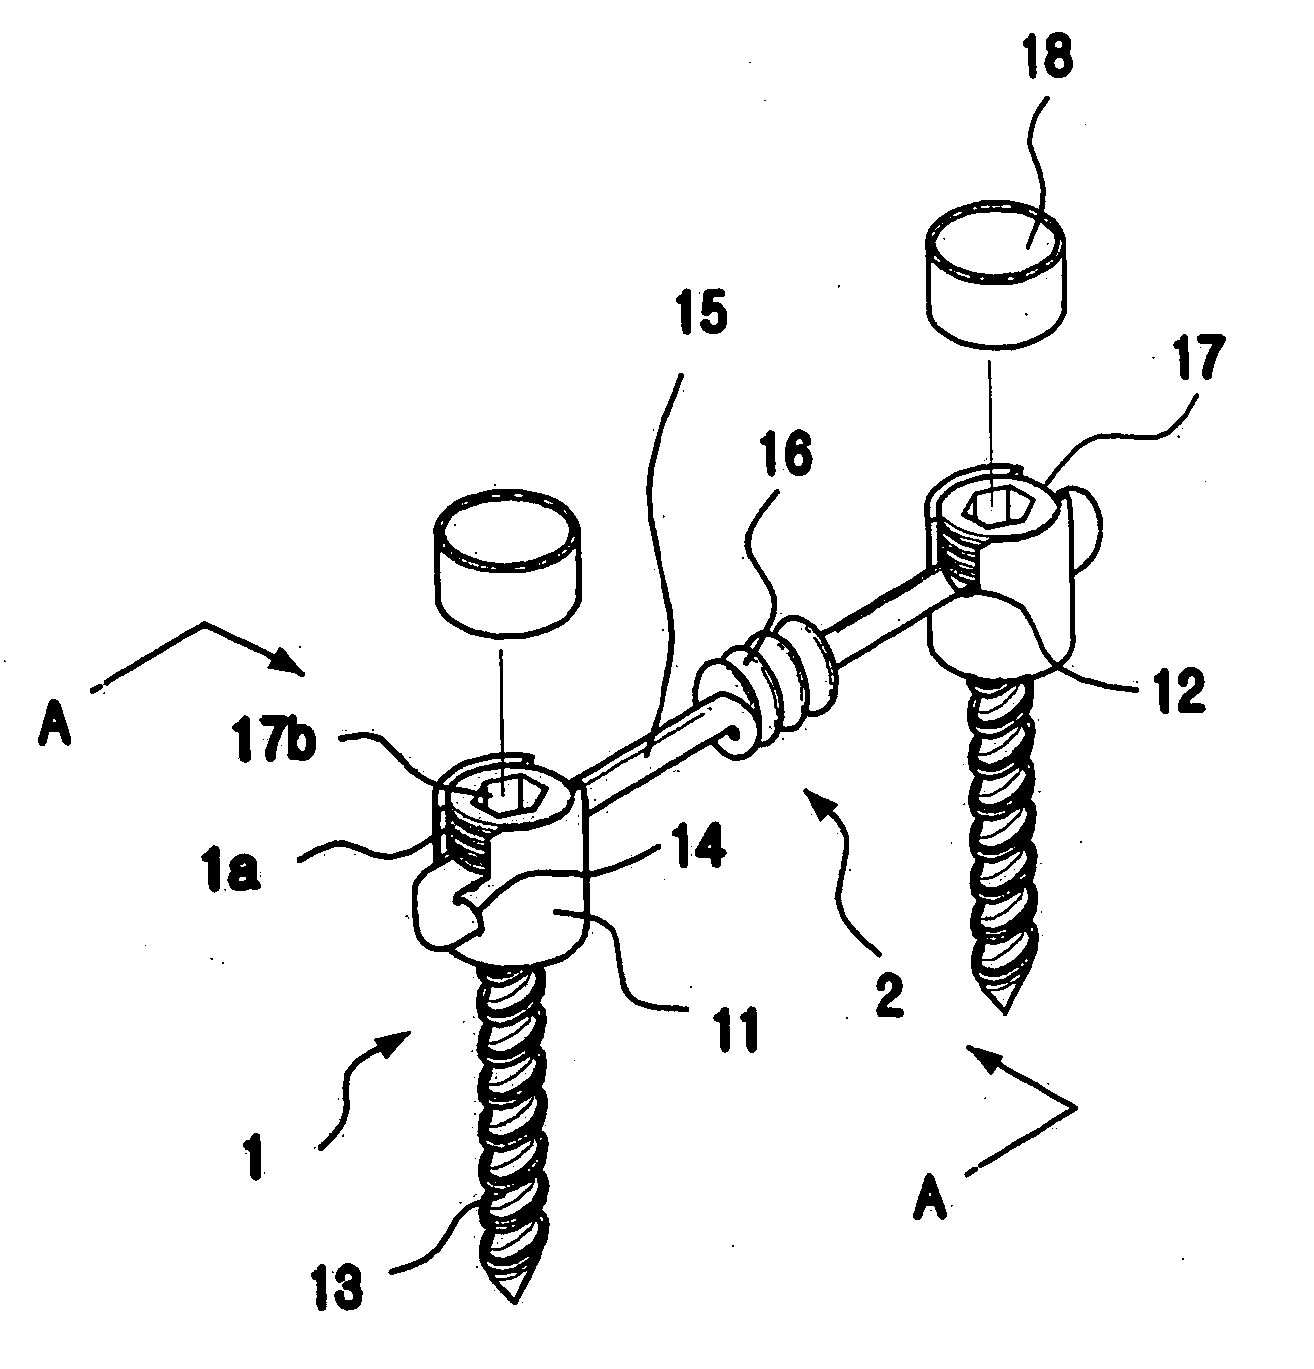 Bio-flexible spinal fixation apparatus with shape memory alloy